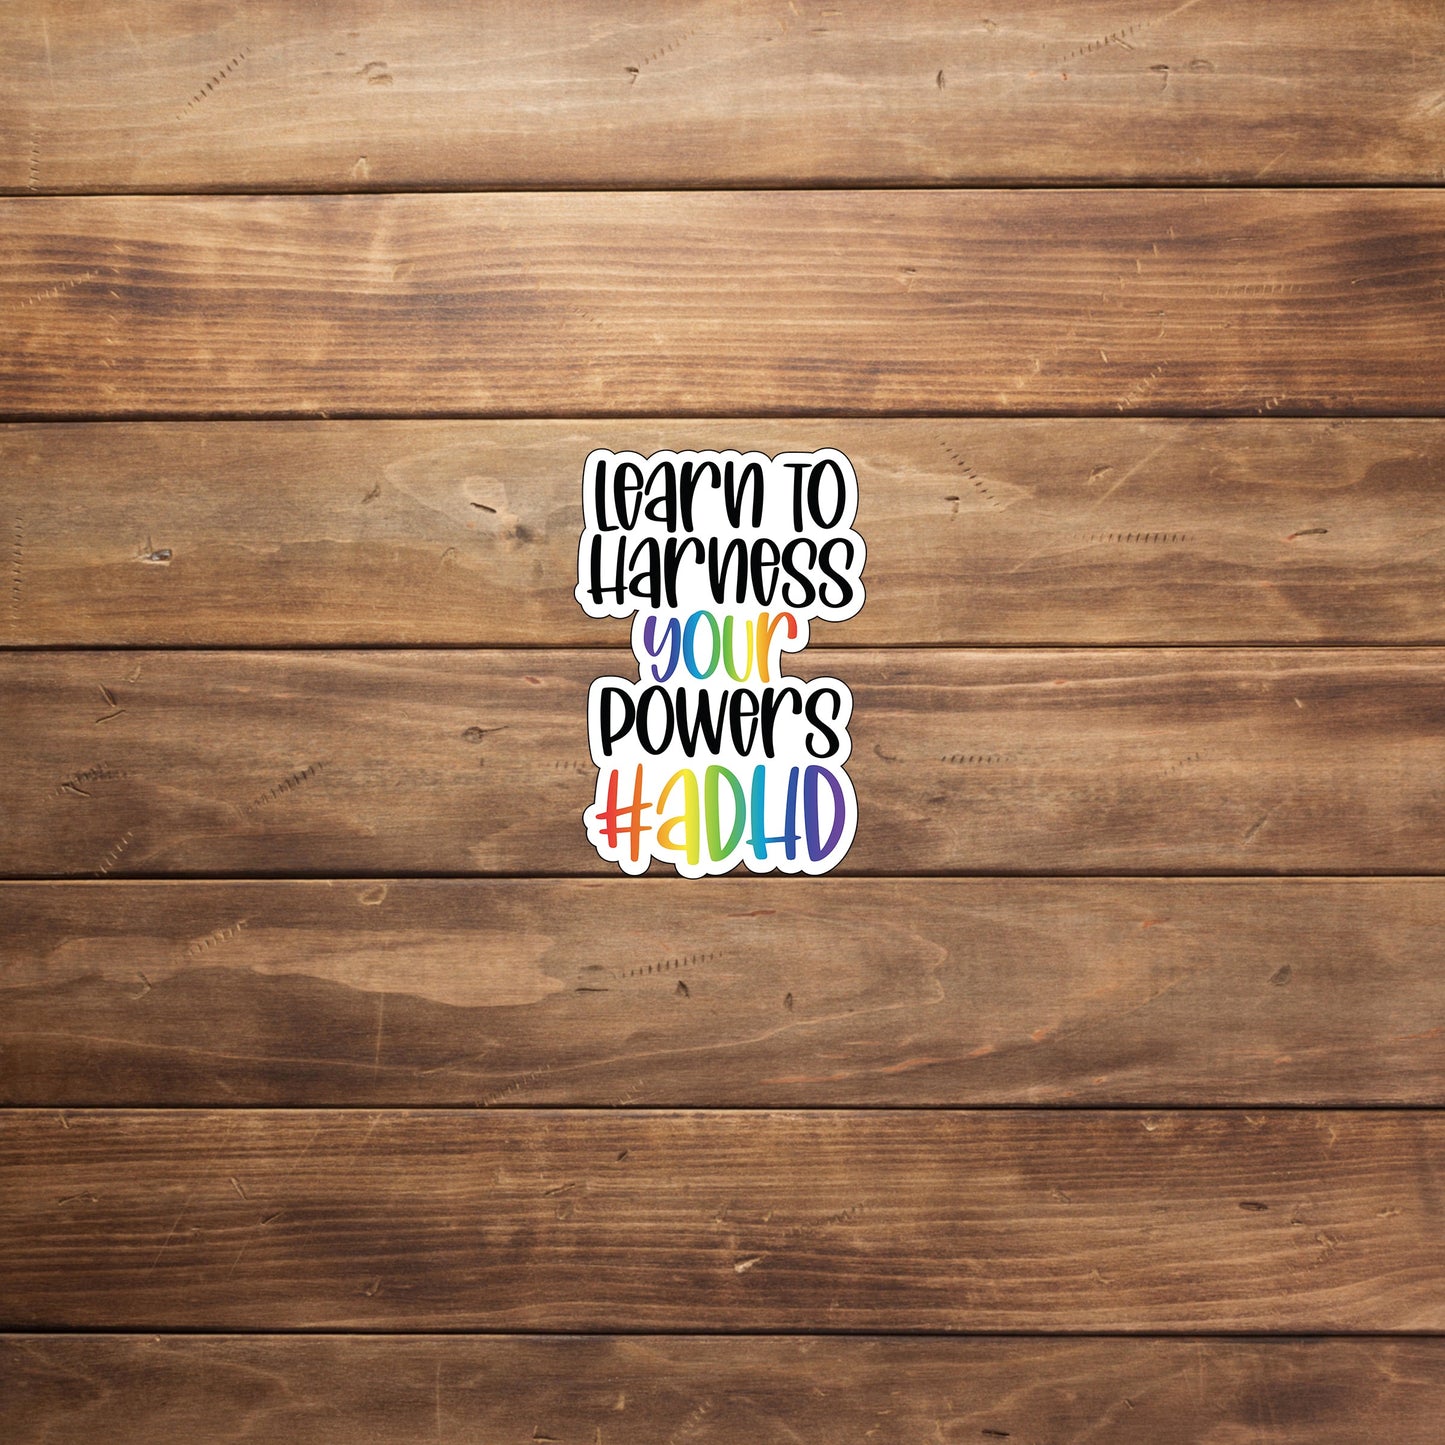 Learn To Harness your powers, ADHD  Sticker,  Vinyl sticker, laptop sticker, Tablet sticker